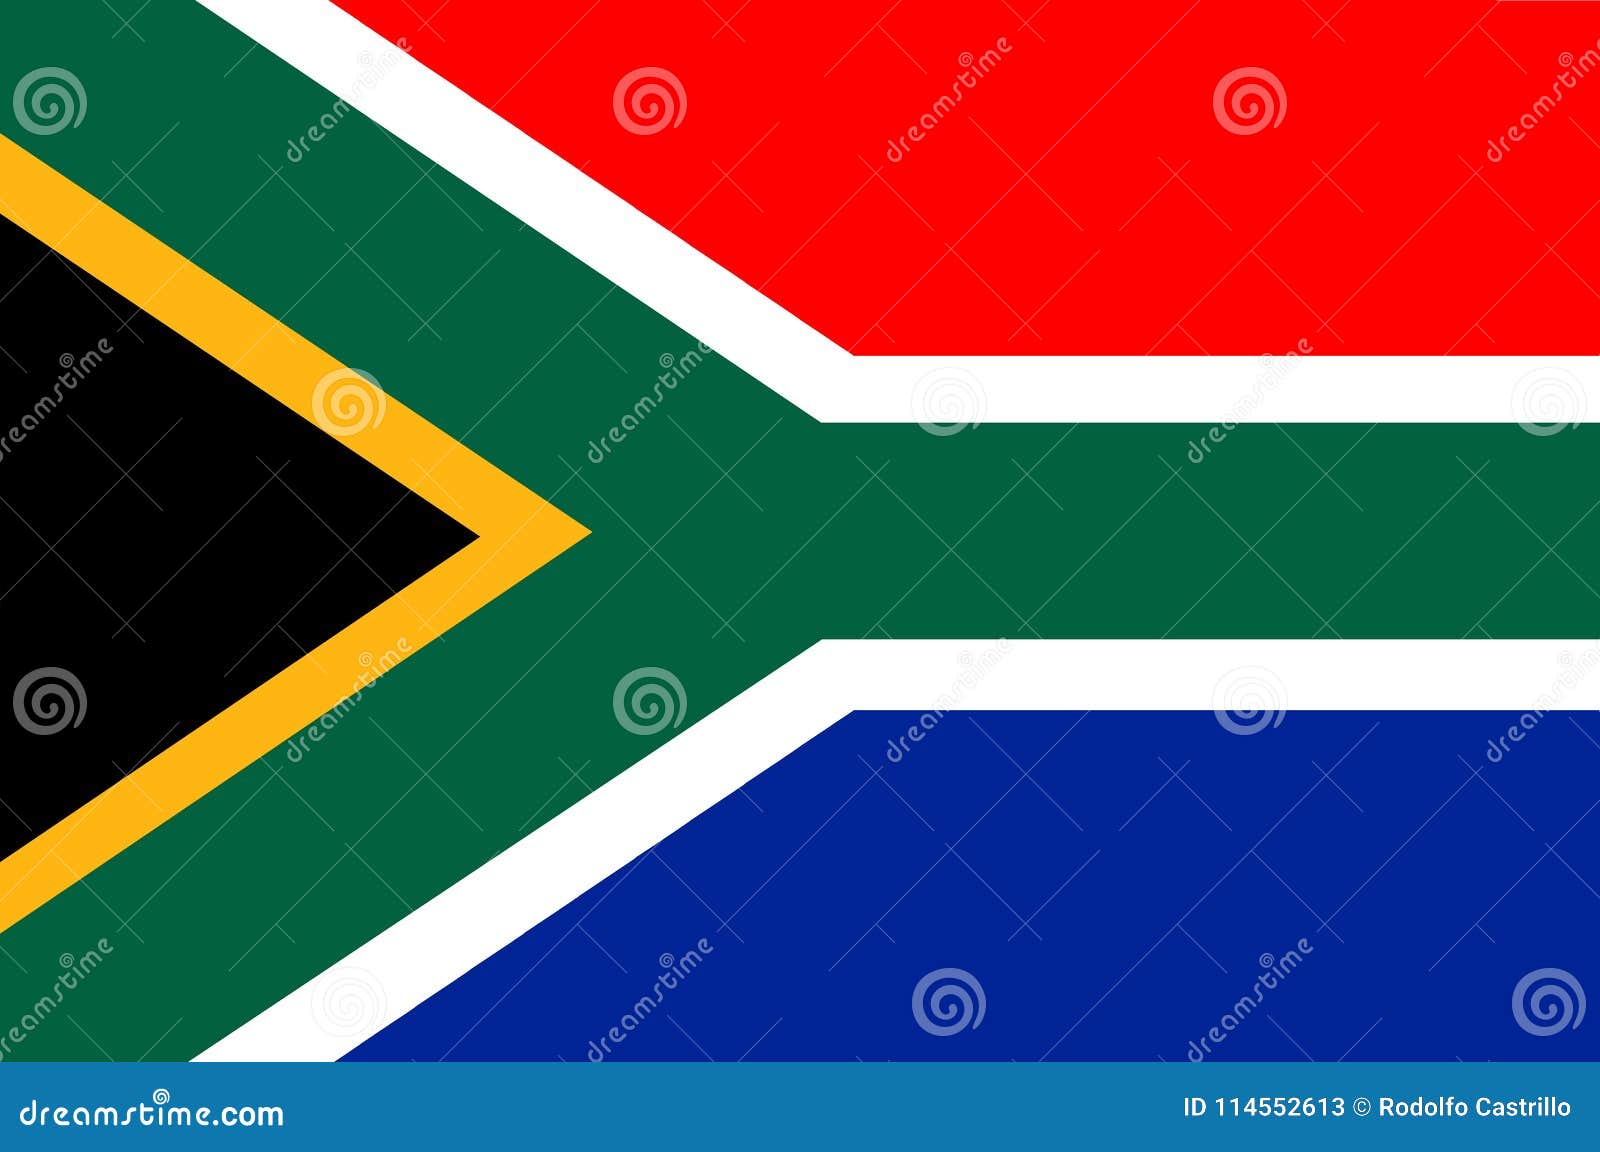 the flag of south africa 2